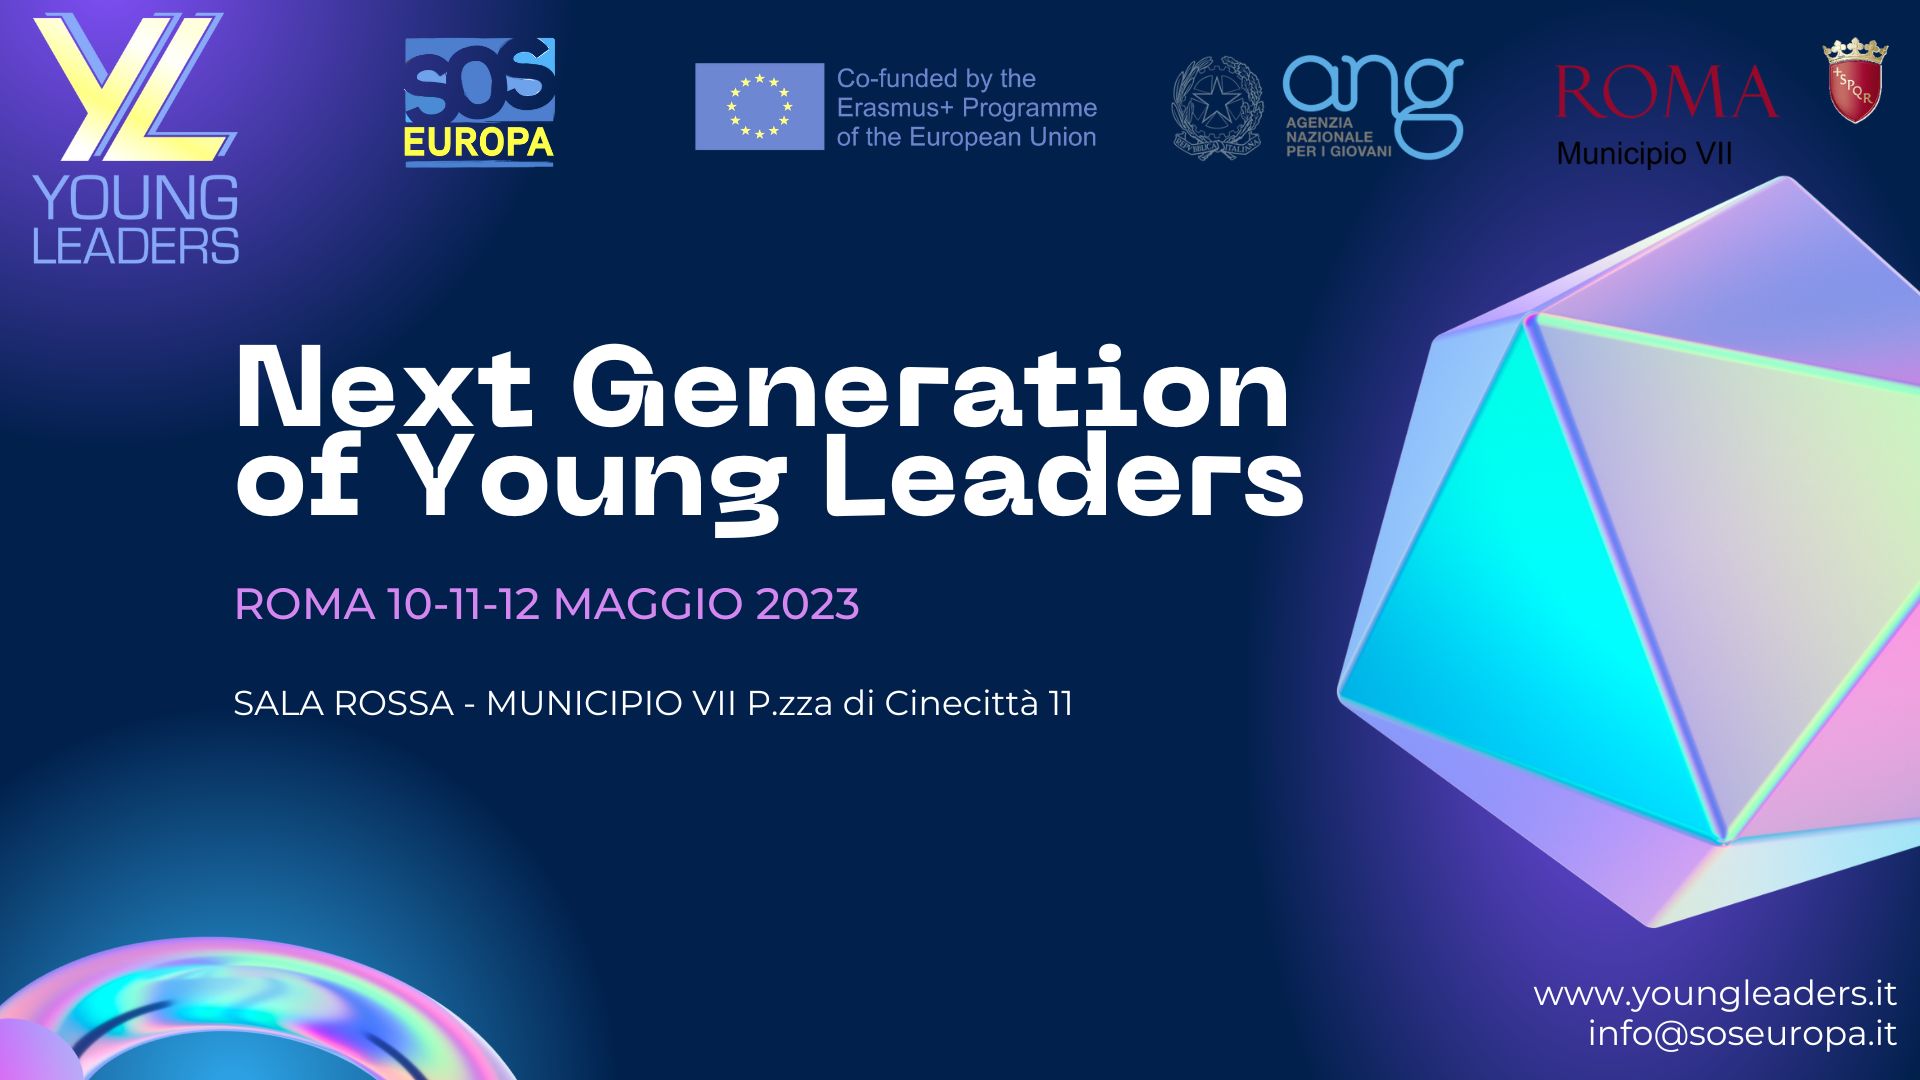 NEXT GENERATION OF YOUNG LEADERS  – APERTE LE CANDIDATURE